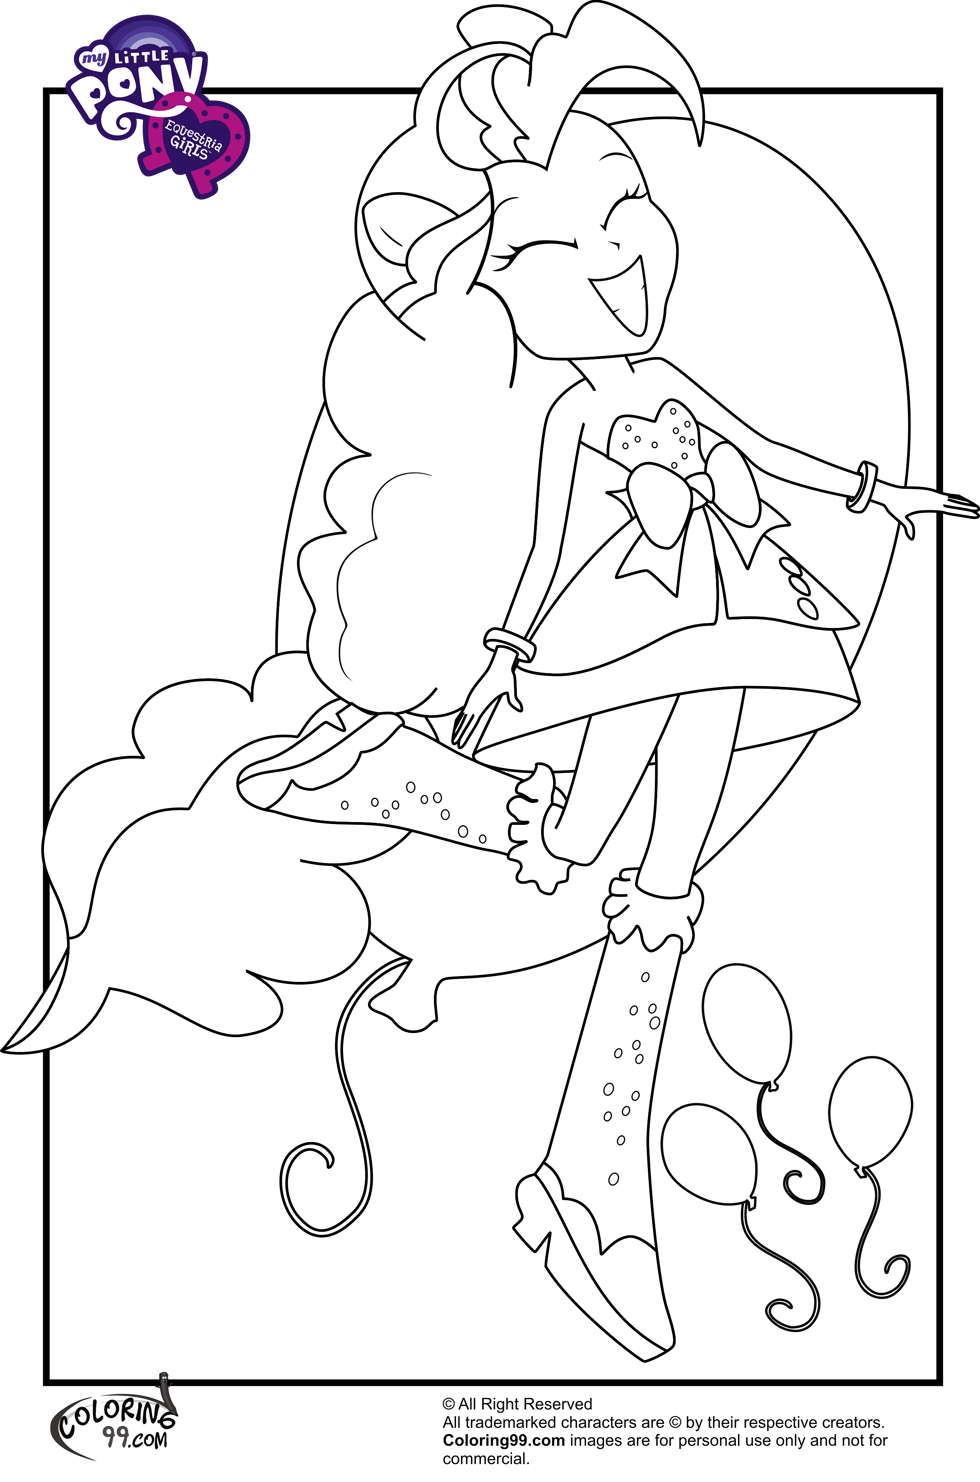 pinkie pie equestria girl with images my little pony on my little pony free coloring pages id=70393 /></p>
<p>pinkie pie equestria girl with images my little pony.</p>
<p>the animal character could be found in many animations and that is why the kids will also love the my little pony coloring pages however these peaceful and adorable ponies are often bothered by ugly witches the ponies live in a country populated by peaceful creatures.</p>
<p> <img loading=